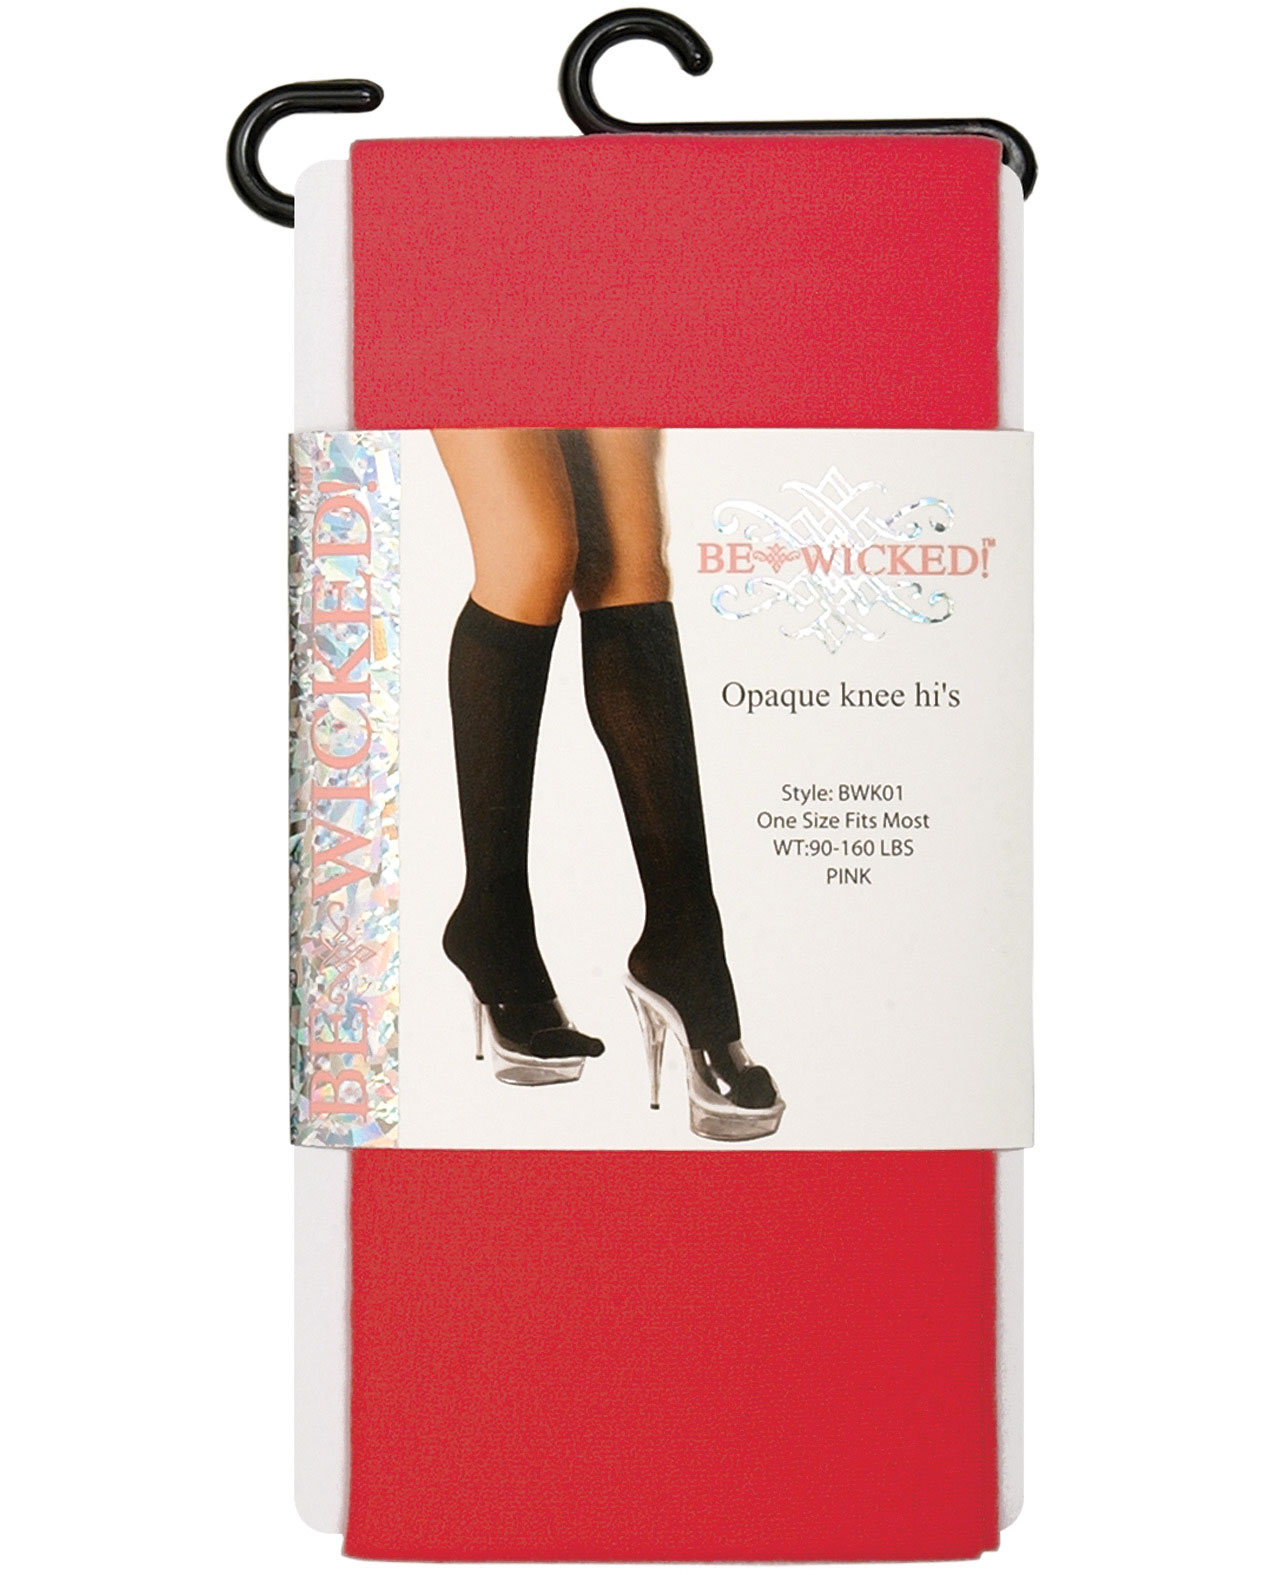 Be wicked Women's Opaque knee highs - One Size